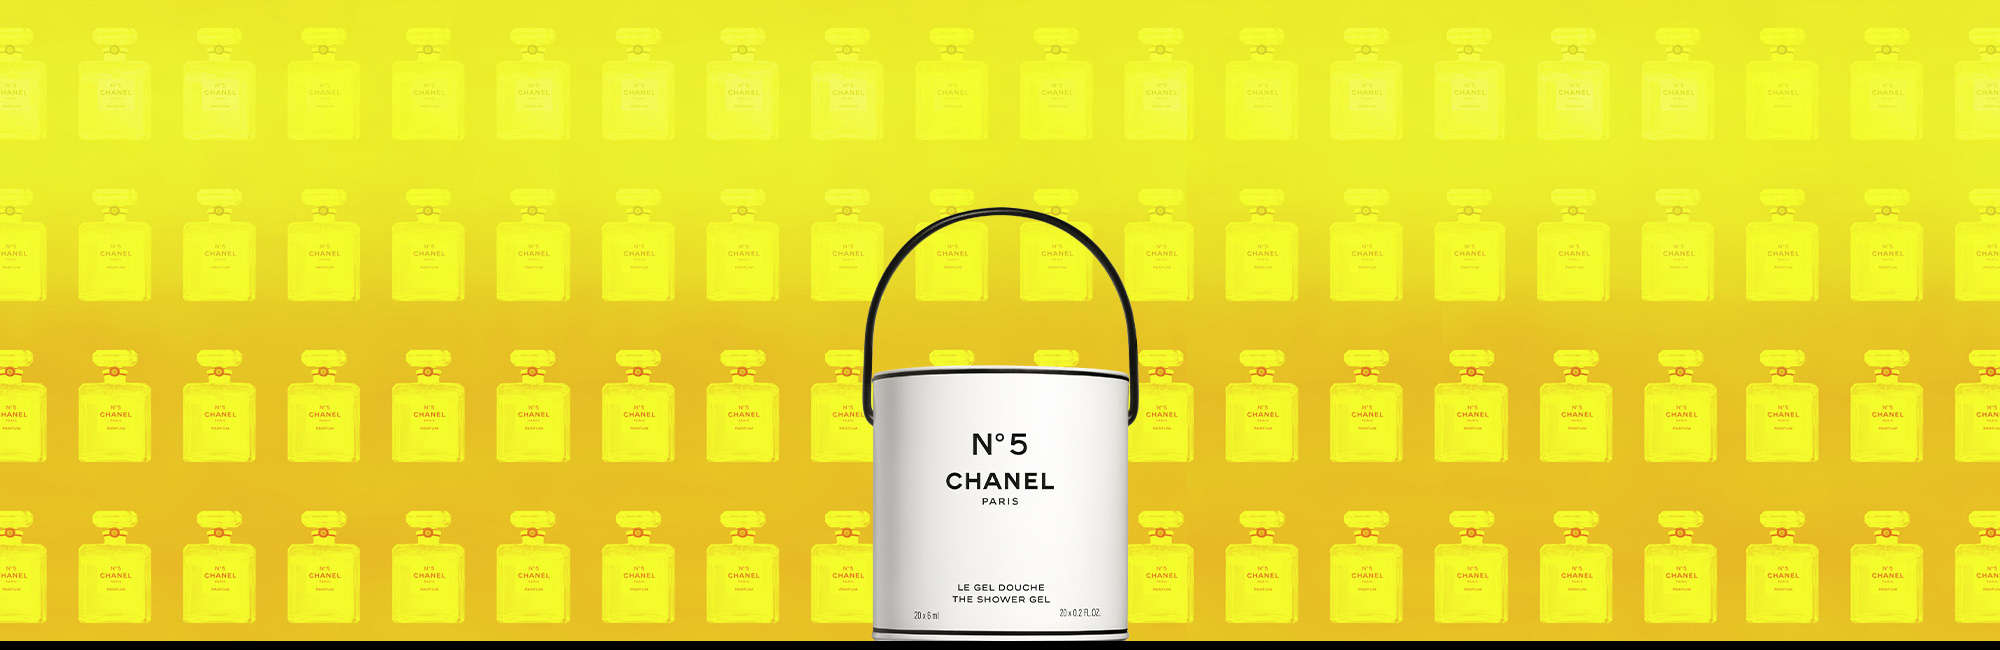 Chanel no 5 cookis  Chanel no 5, Chanel party, Wedding shoe